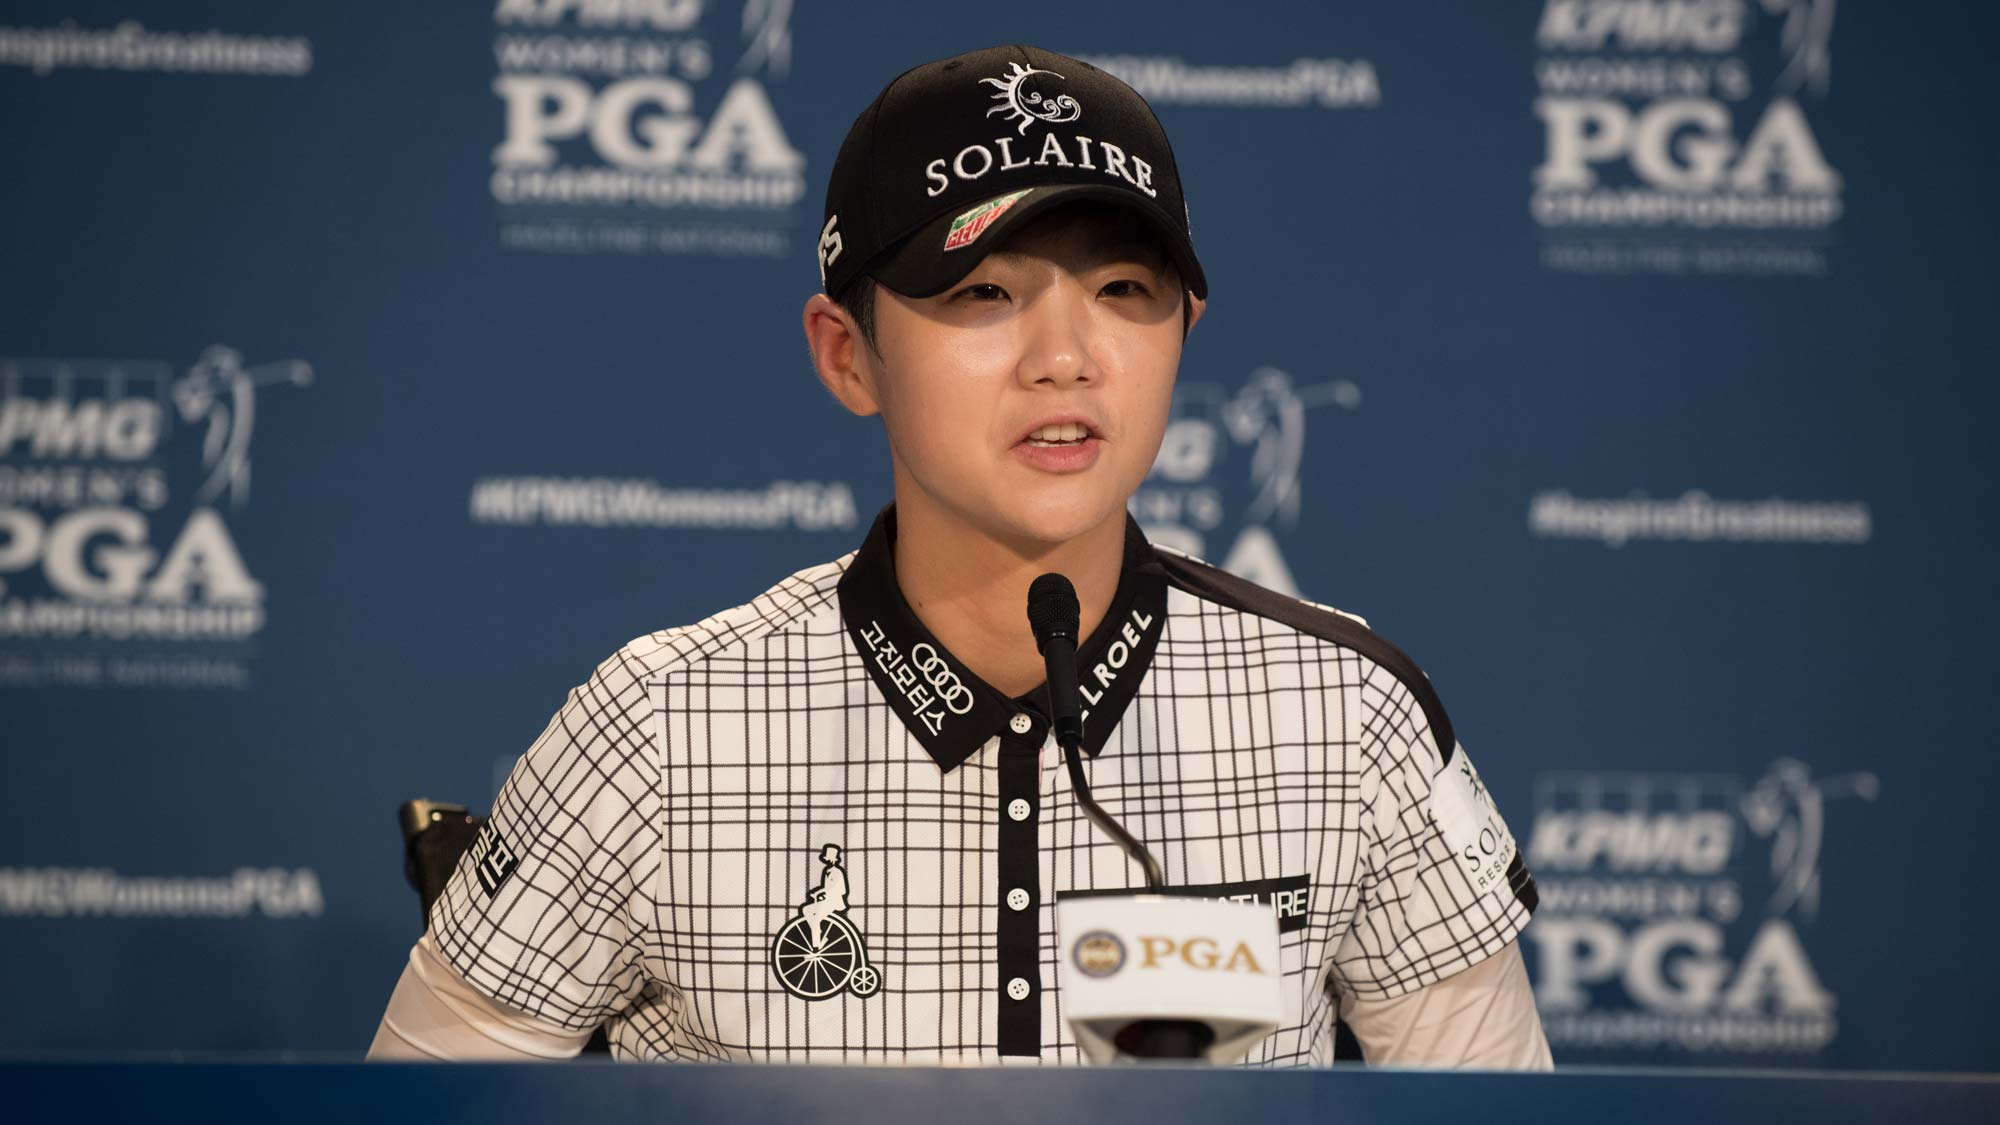 Sung Hyun Park of the Republic of Korea speaks at a press conference during the practice round for the 65th KPMG Women’s PGA Championship 